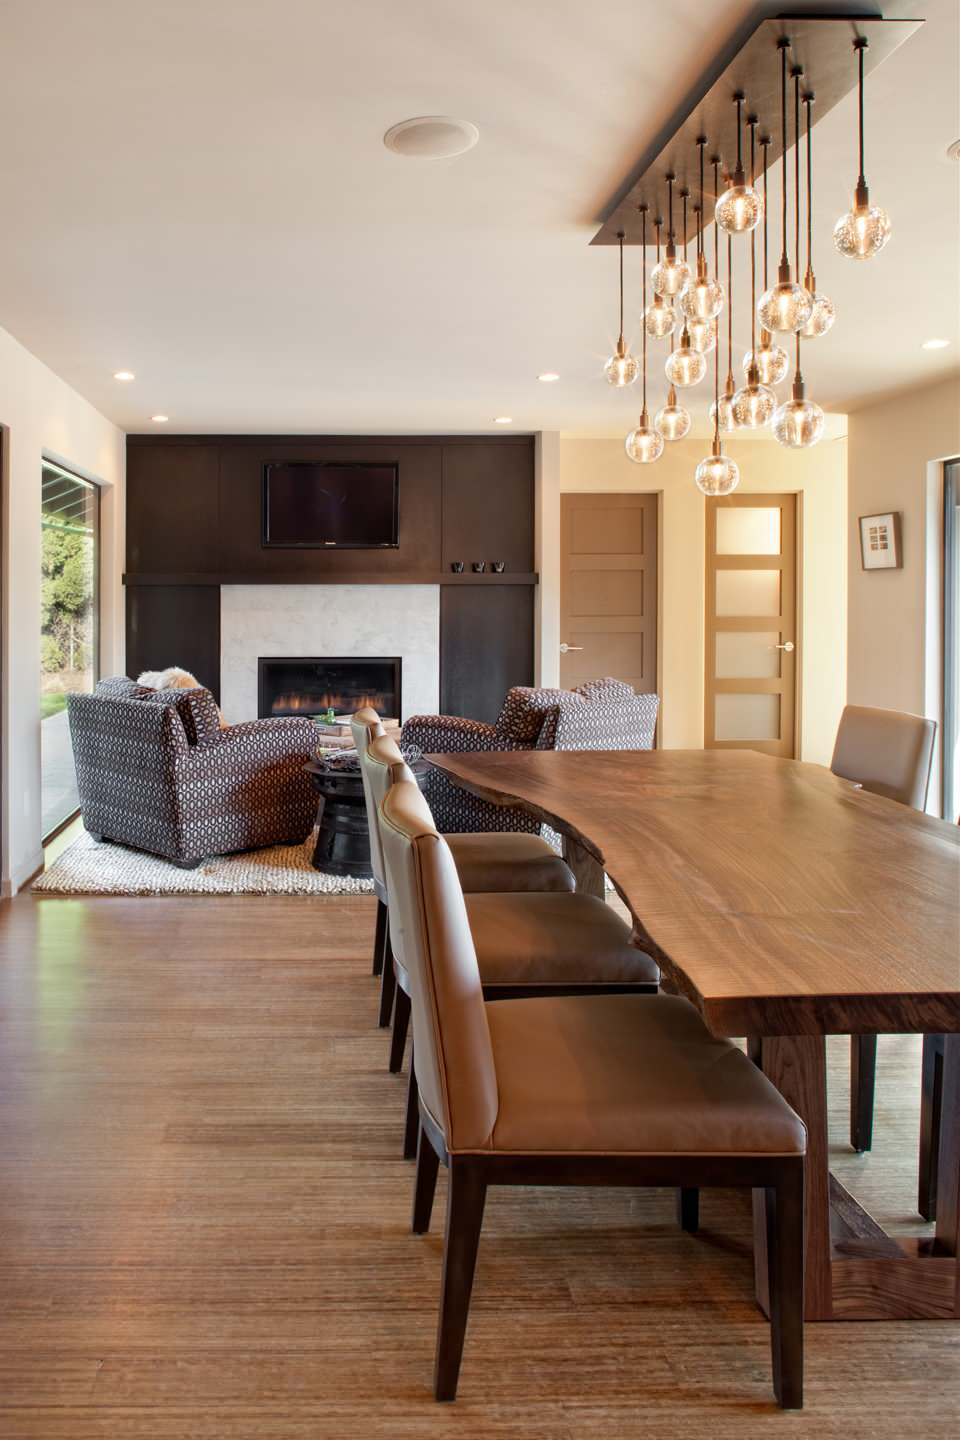 Dining Room Table Lighting Houzz, Wood Dining Room Light Fixtures